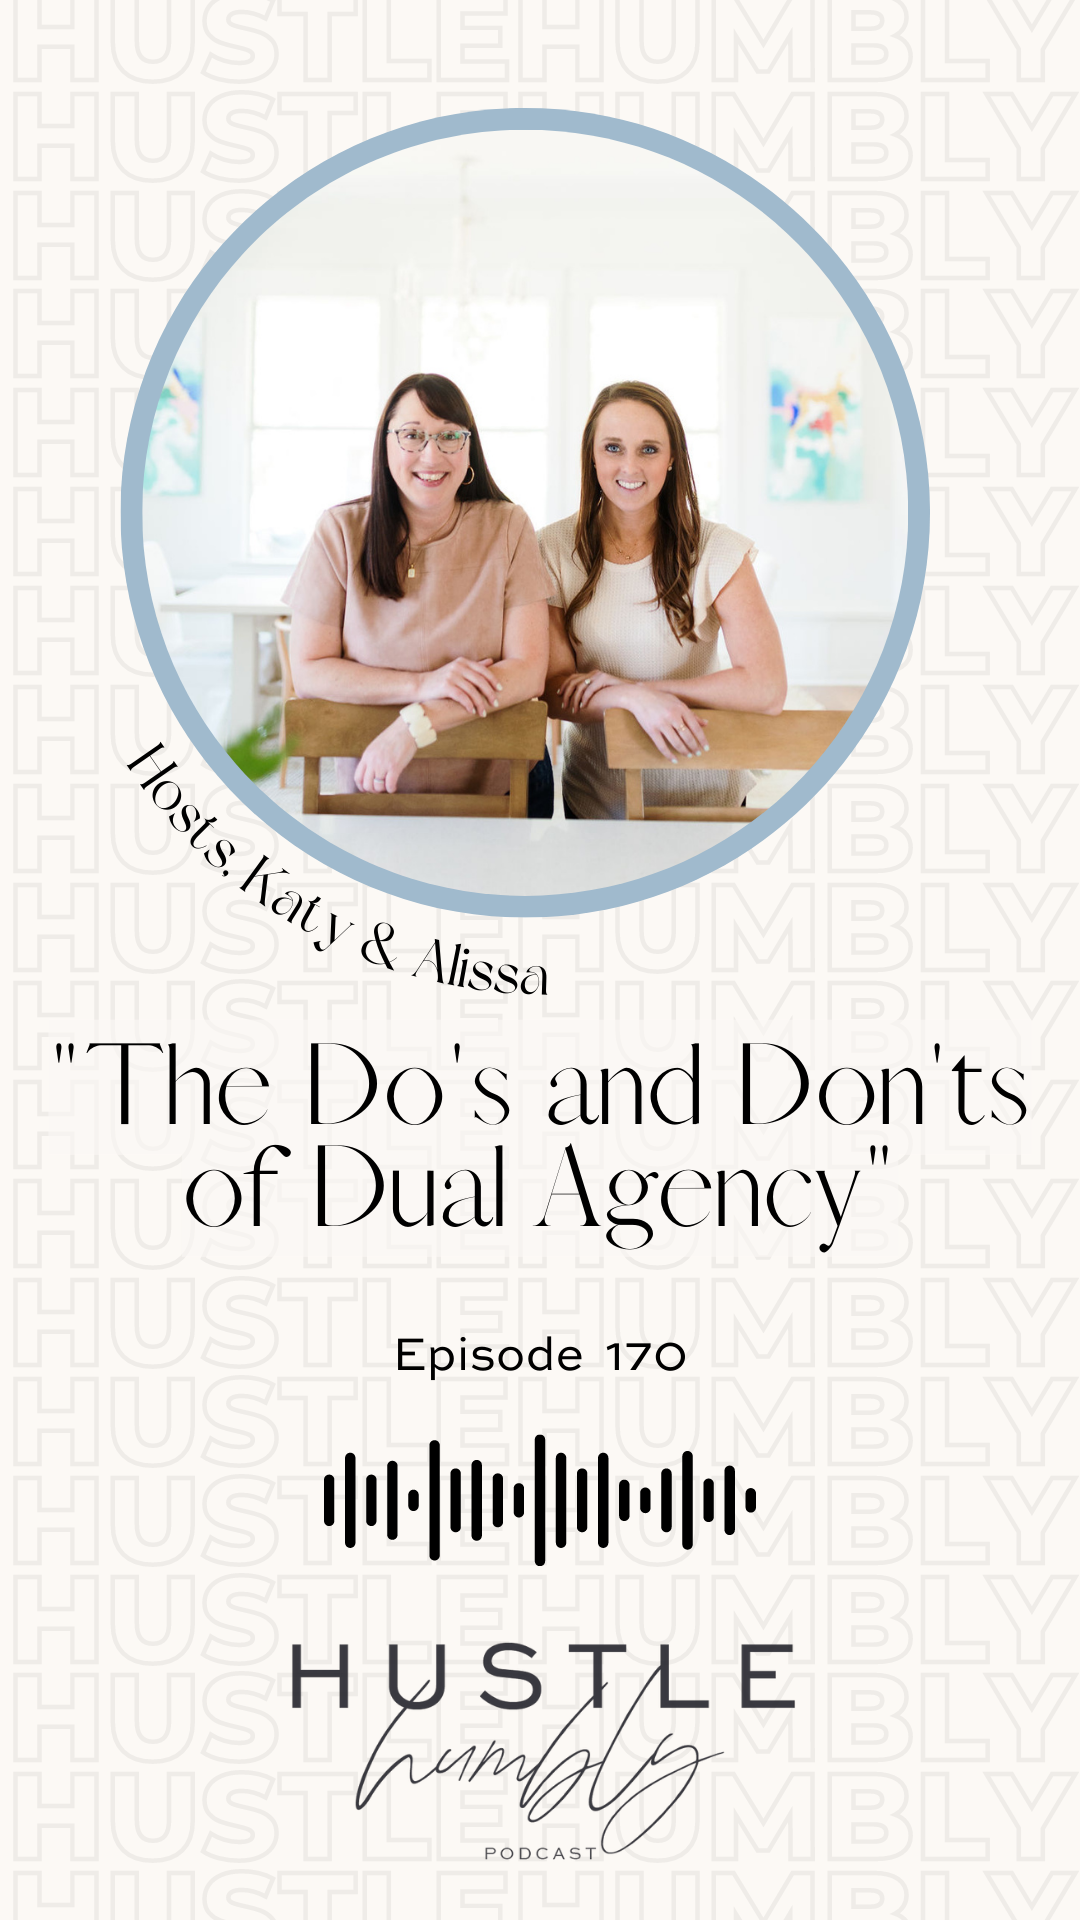 Hustle Humbly Podcast Episode 170: The Do’s and Don’ts of Dual Agency